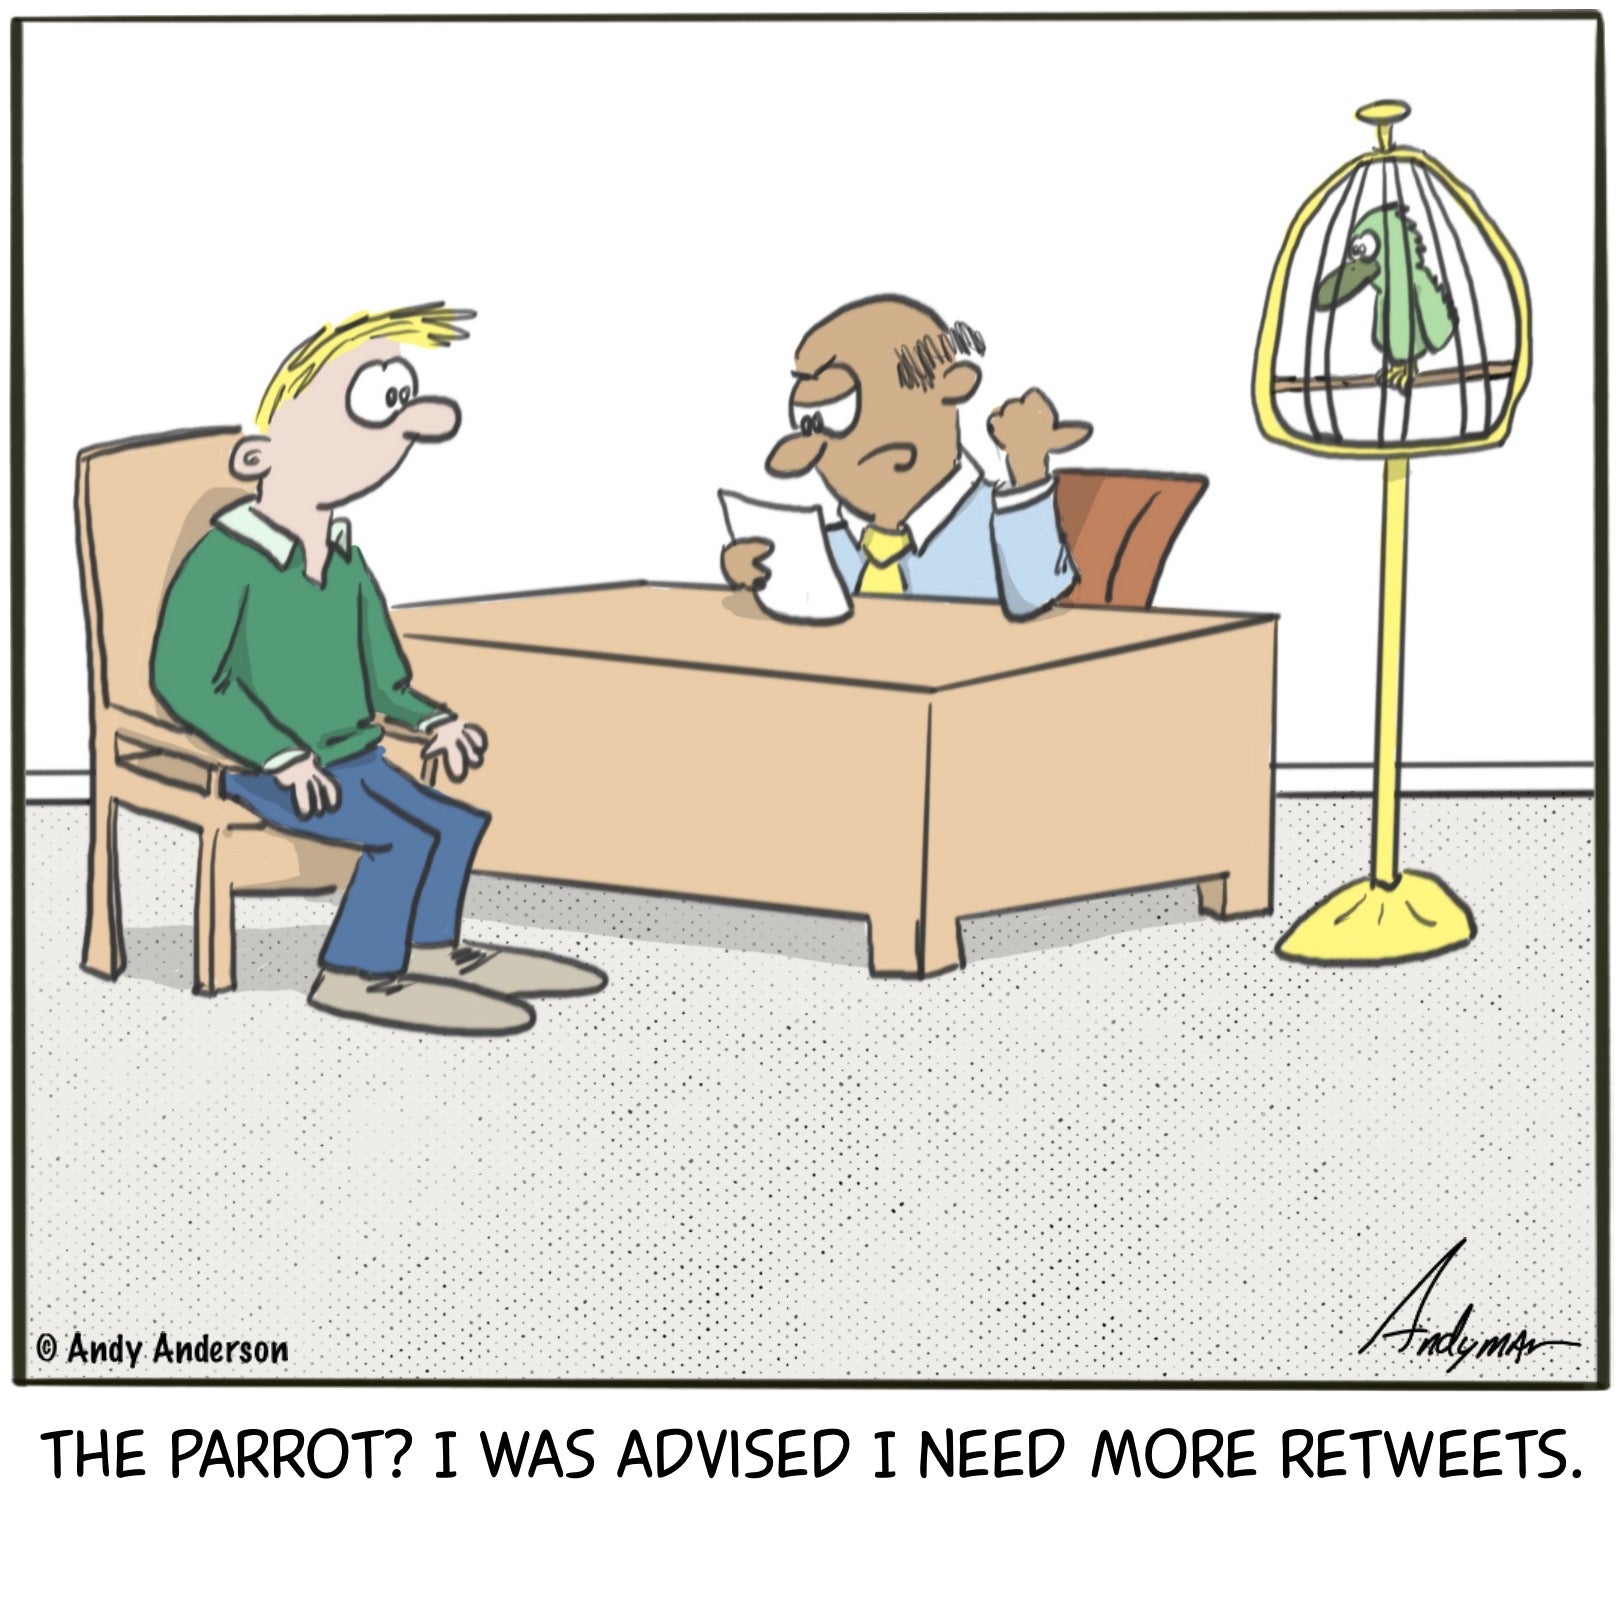 Cartoon about having a parrot for retweets by Andy Anderson